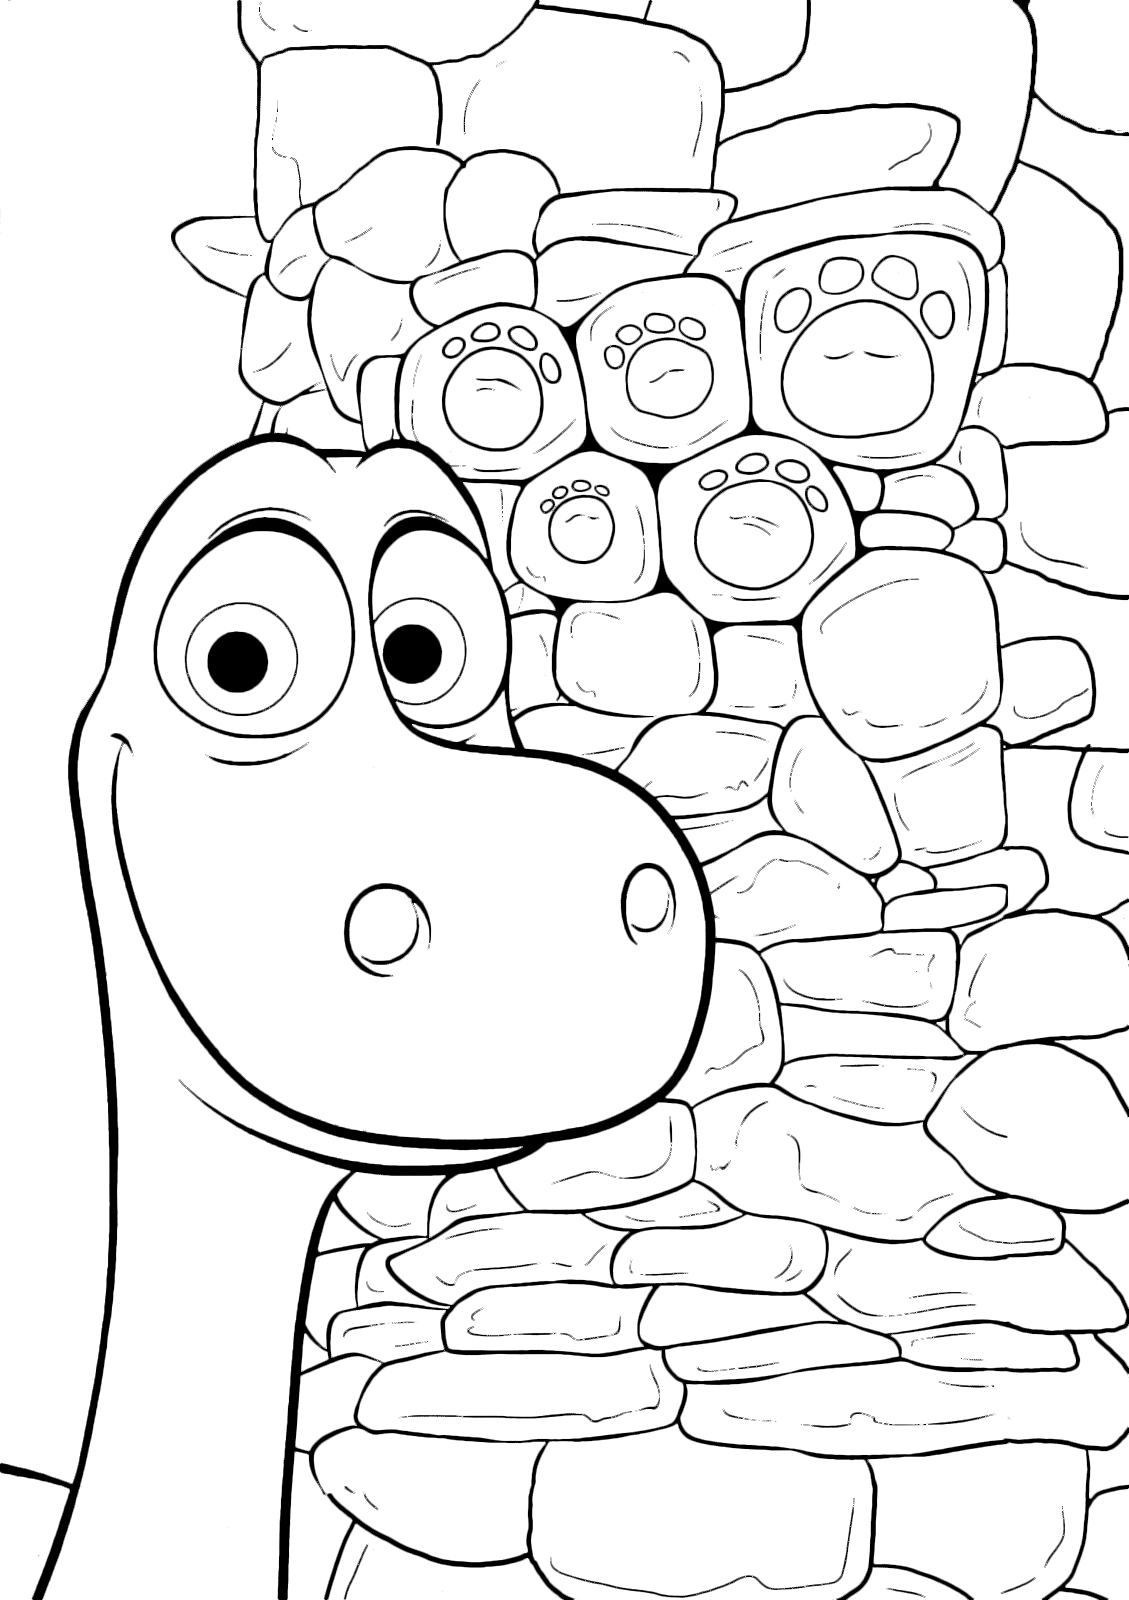 Best Ideas For Coloring Arlo The Good Dinosaur Coloring Pages